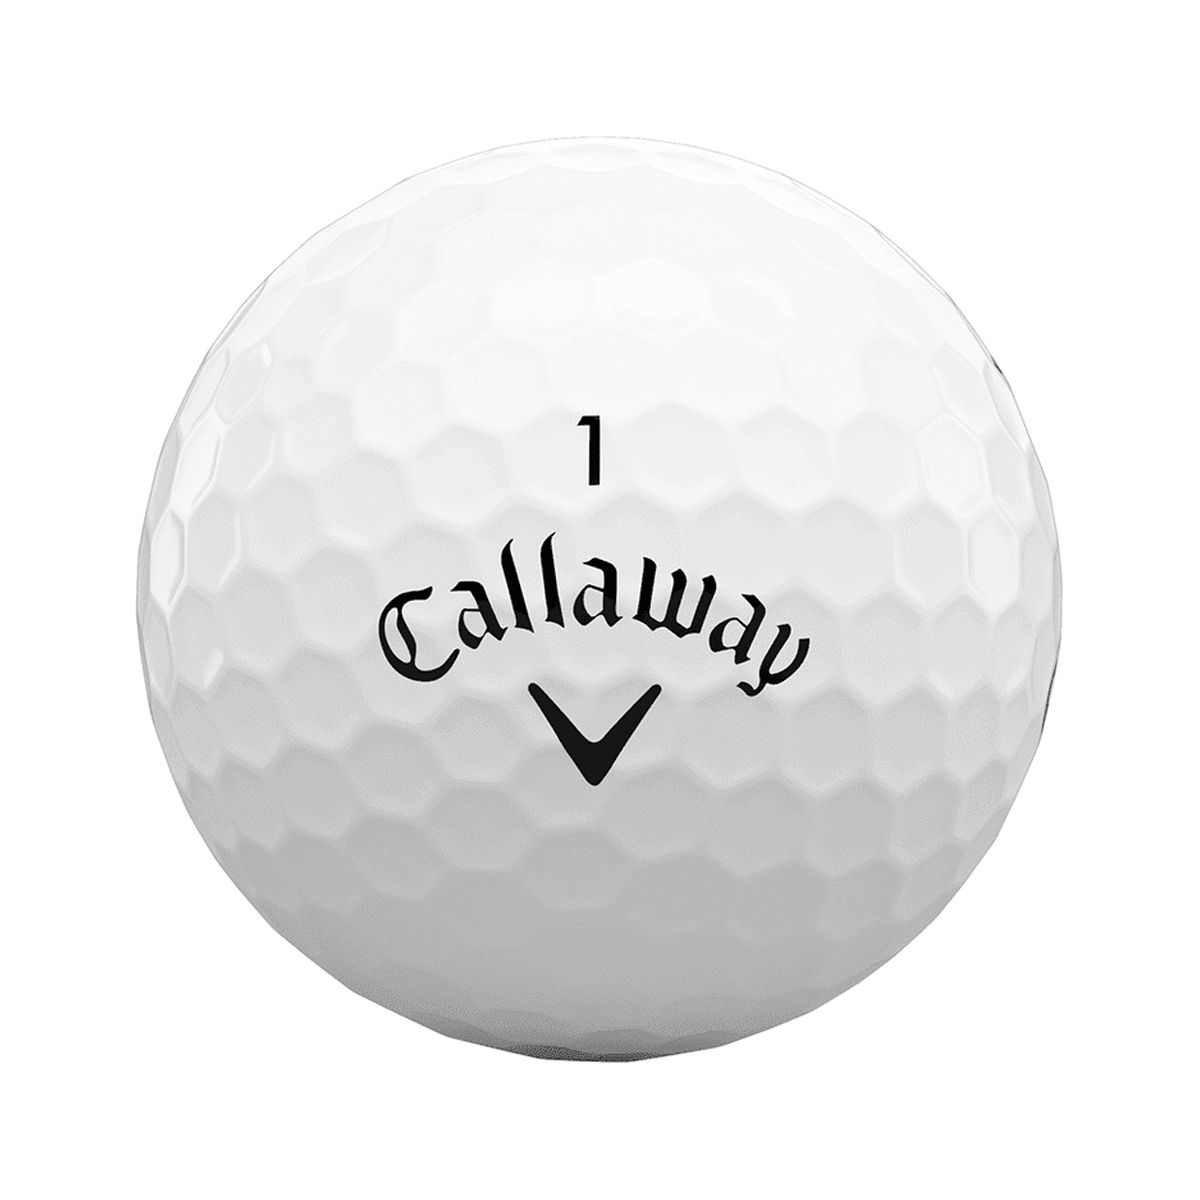 Callaway Supersoft 2021 Golf Balls, White, 12 Pack - image 2 of 6